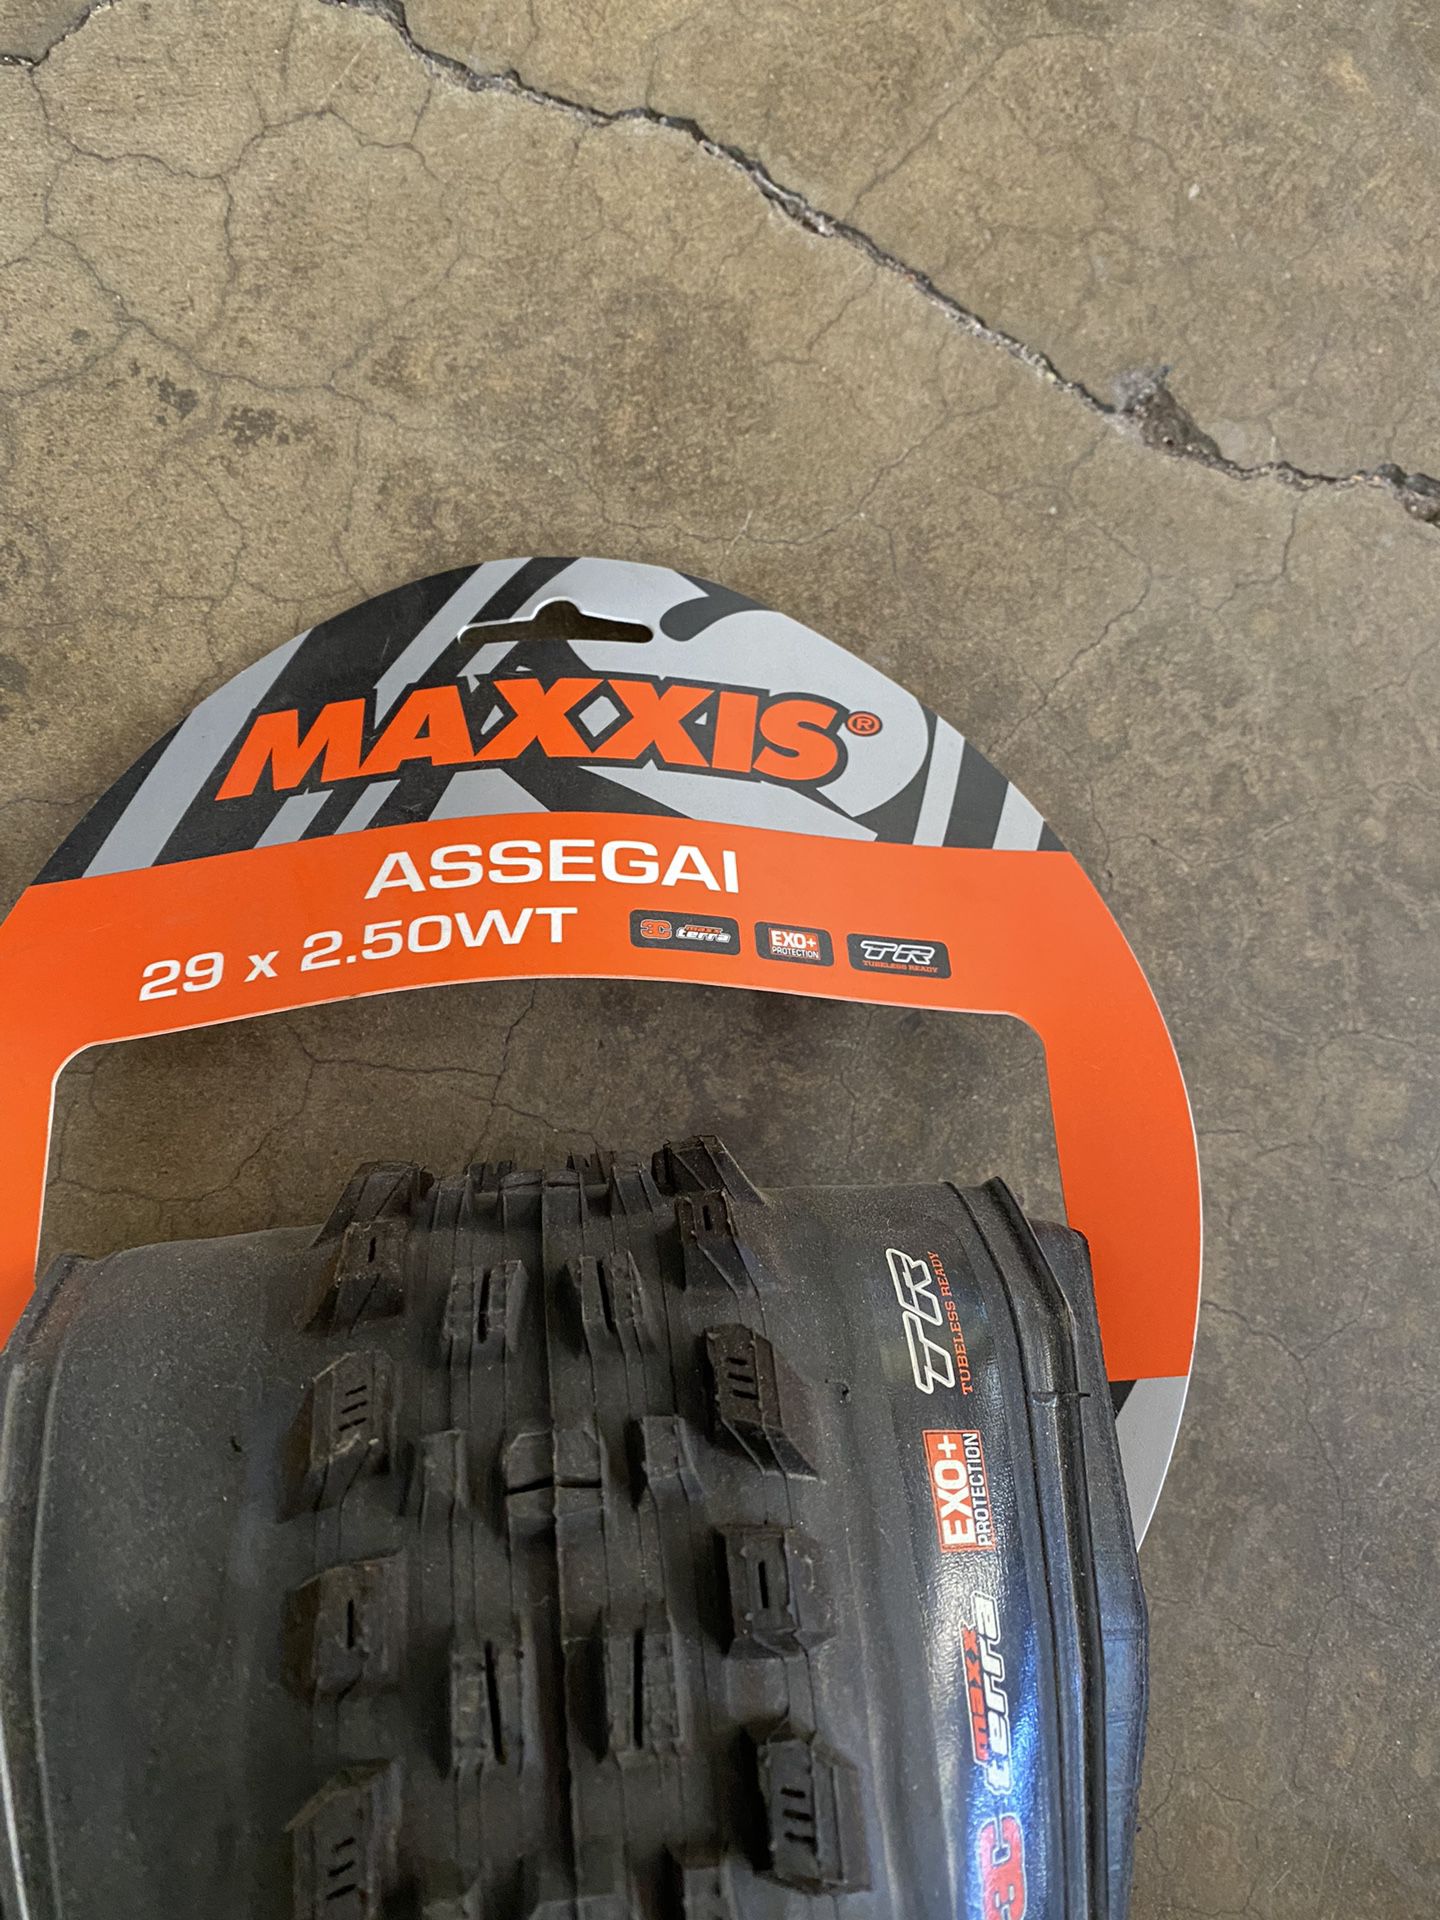 Maxxis Assegai and Maxxis Dissector